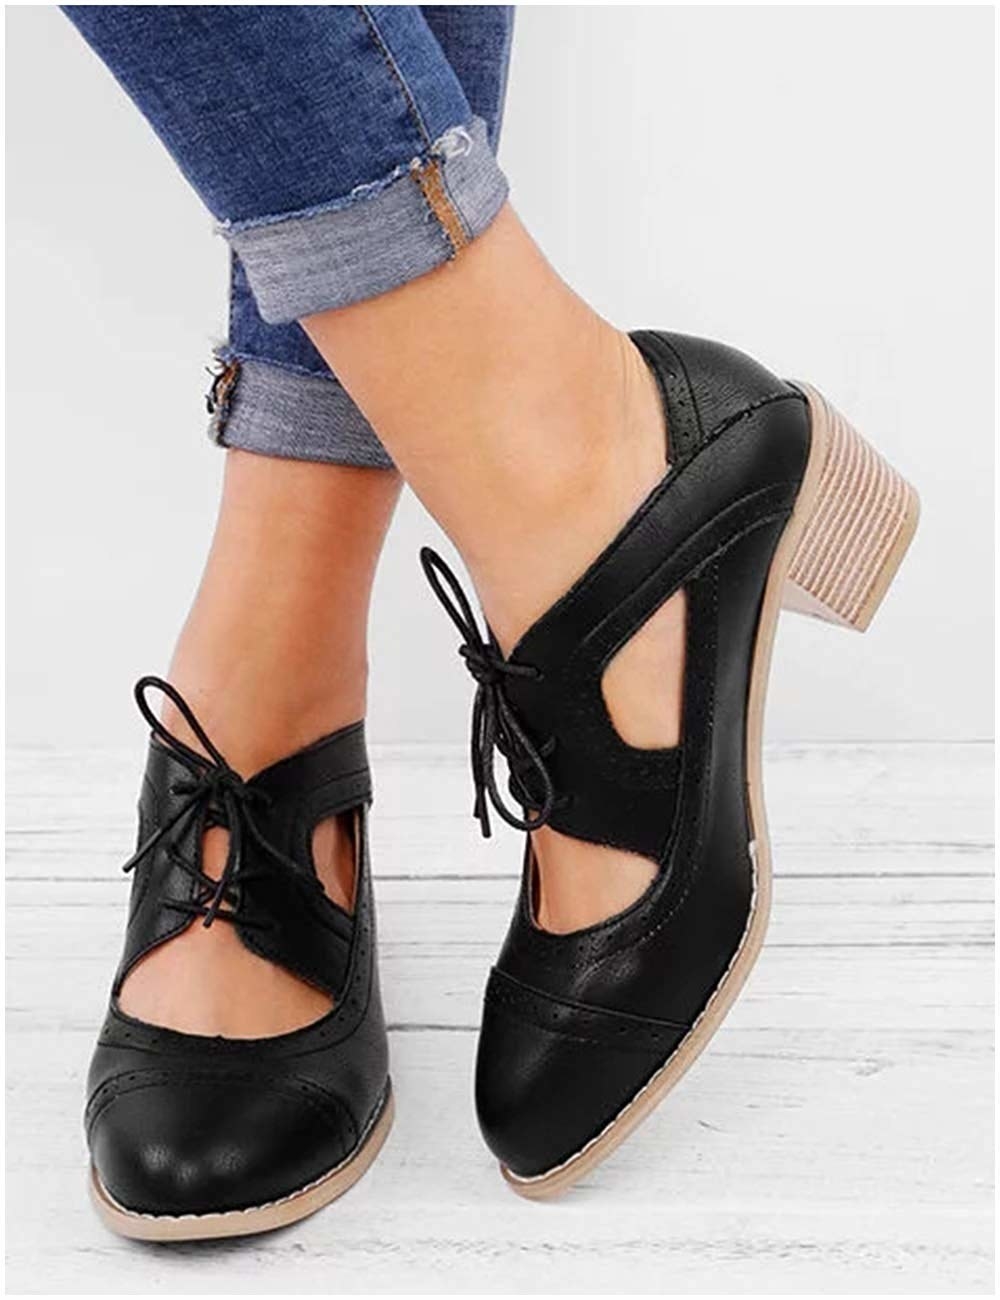 33 Pairs Of Spring Shoes That’ll Make You Say “Boots Shmoots”